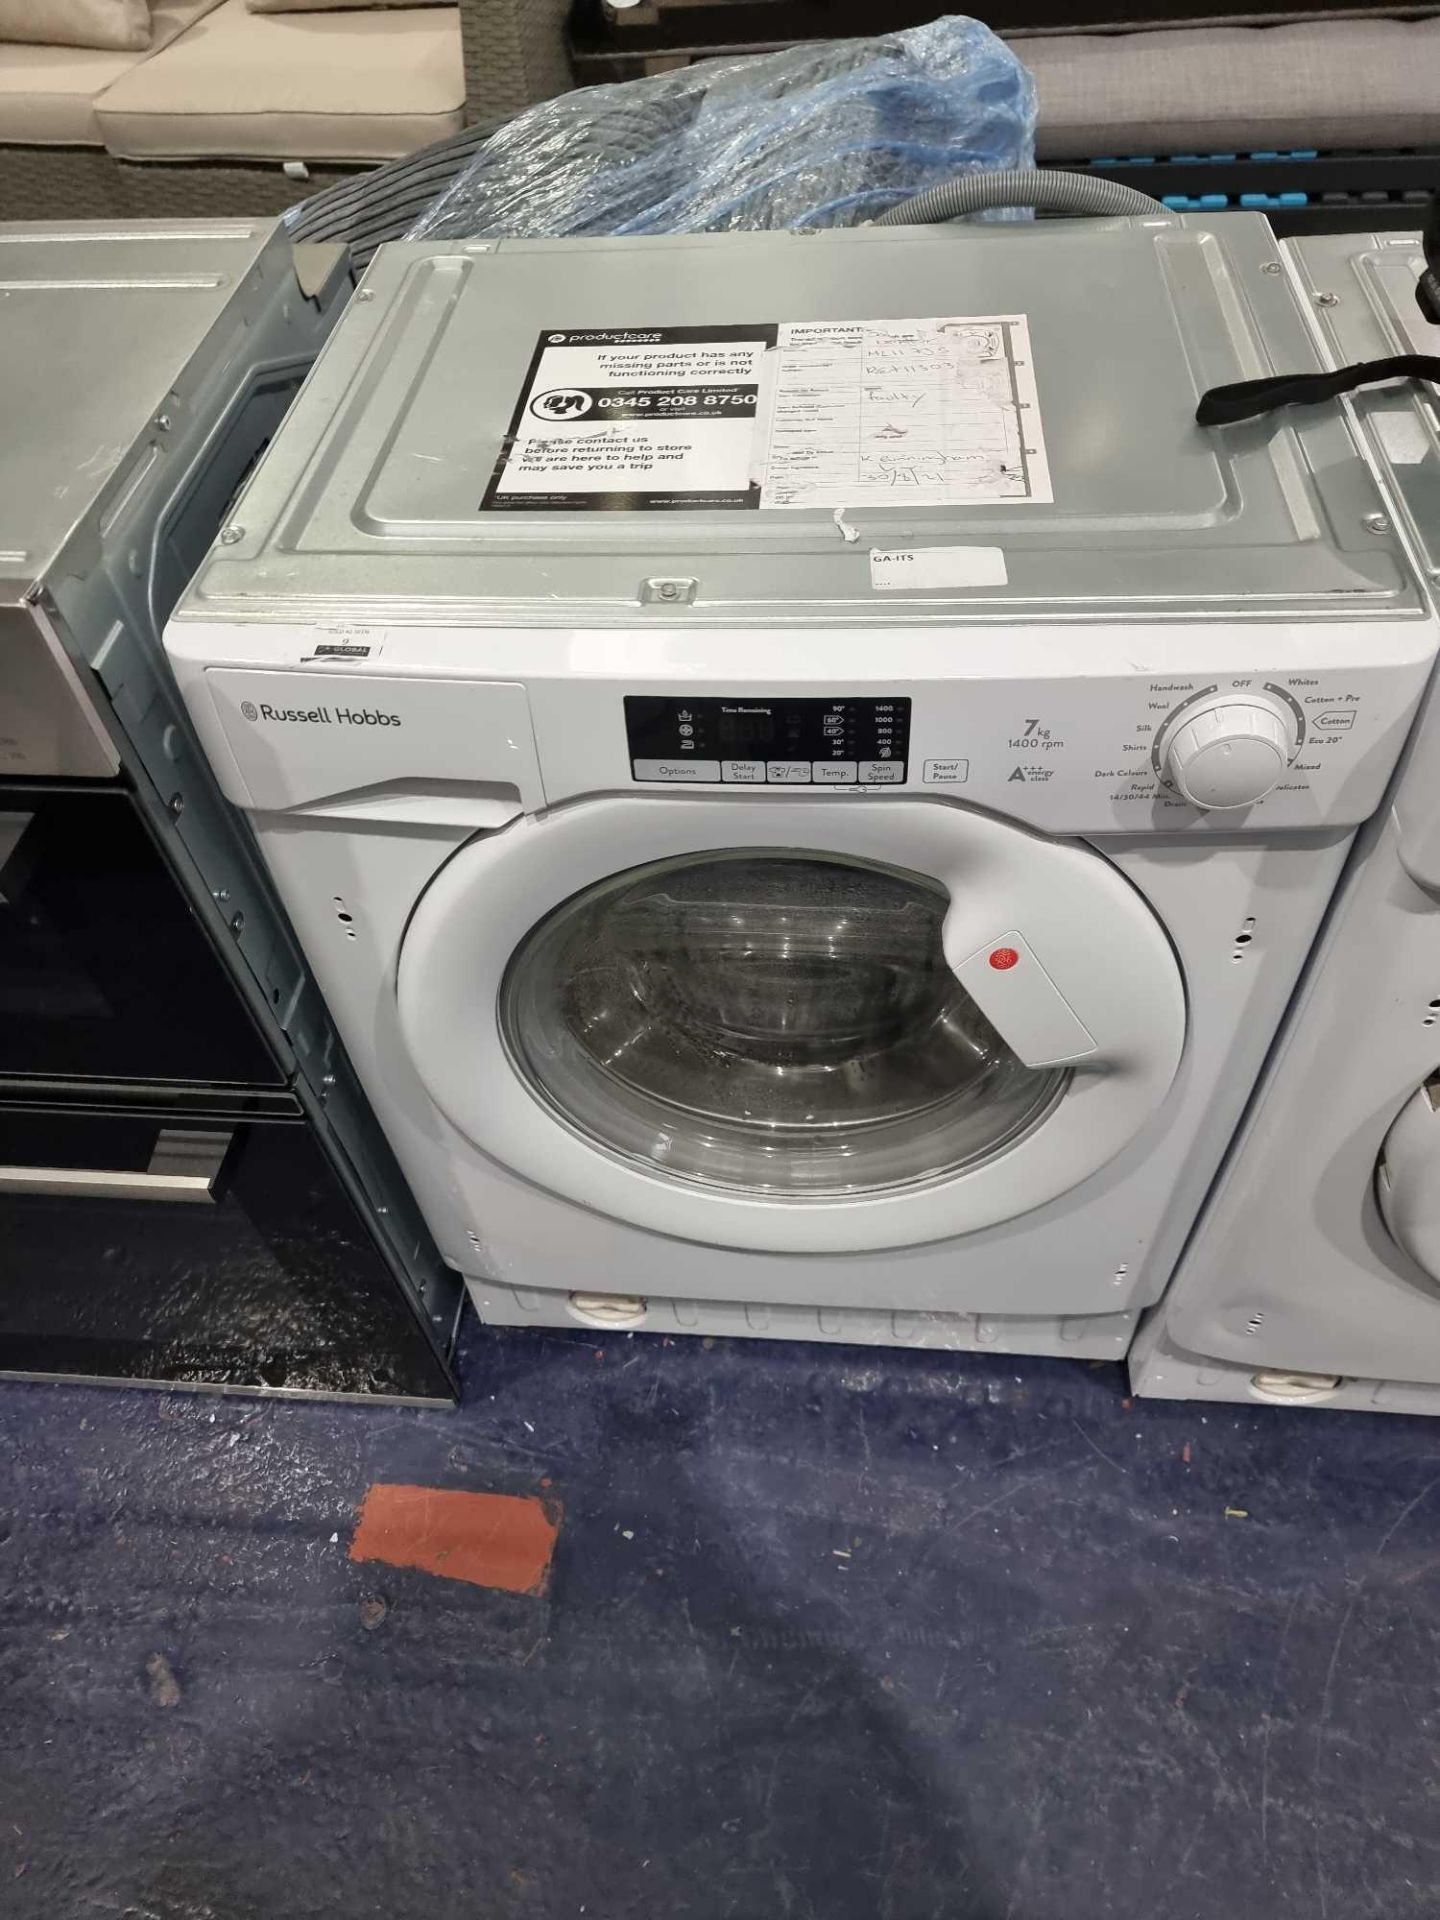 (Sp) RRP £350 Lot To Contain 1 Built In 7Kg 1400 Spin Washing Machine - Image 2 of 2